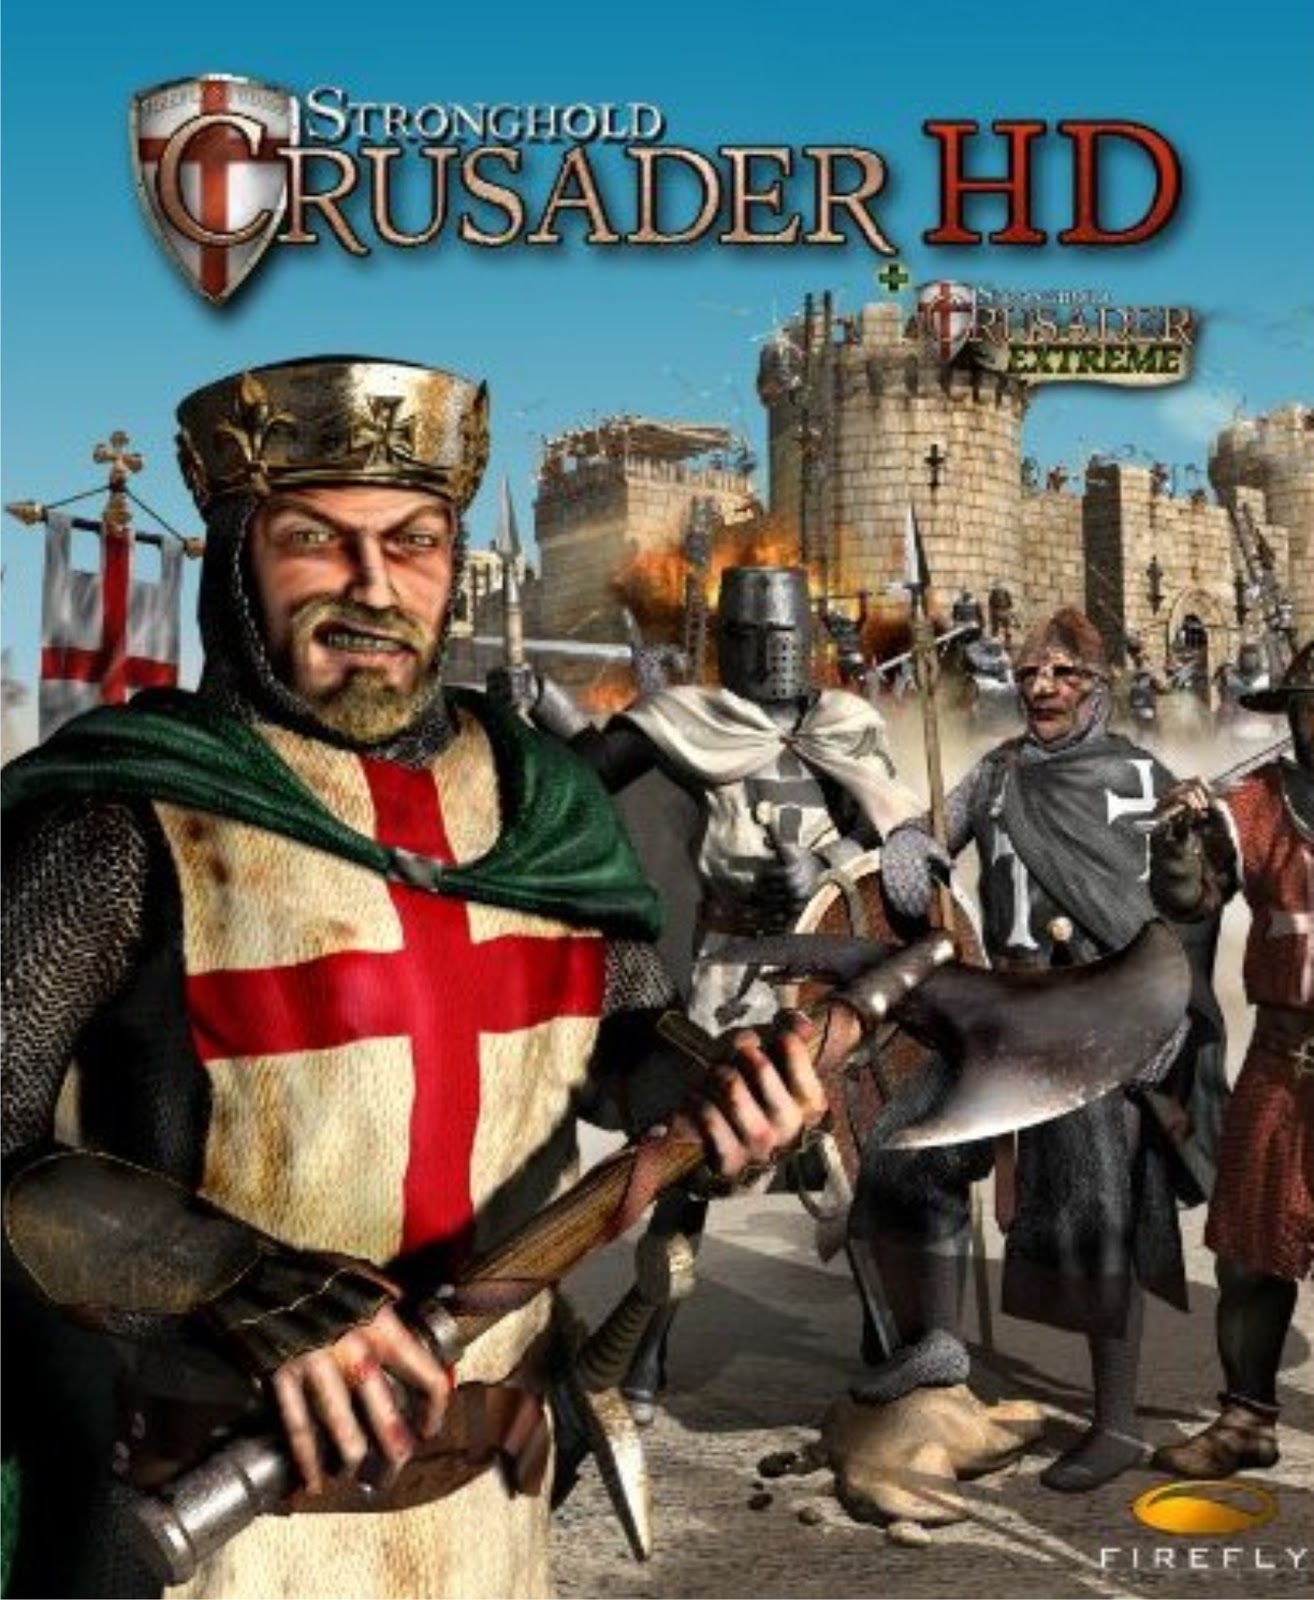 Stronghold Crusader HD 2012 | FULL VERSION | PC Games Free Download